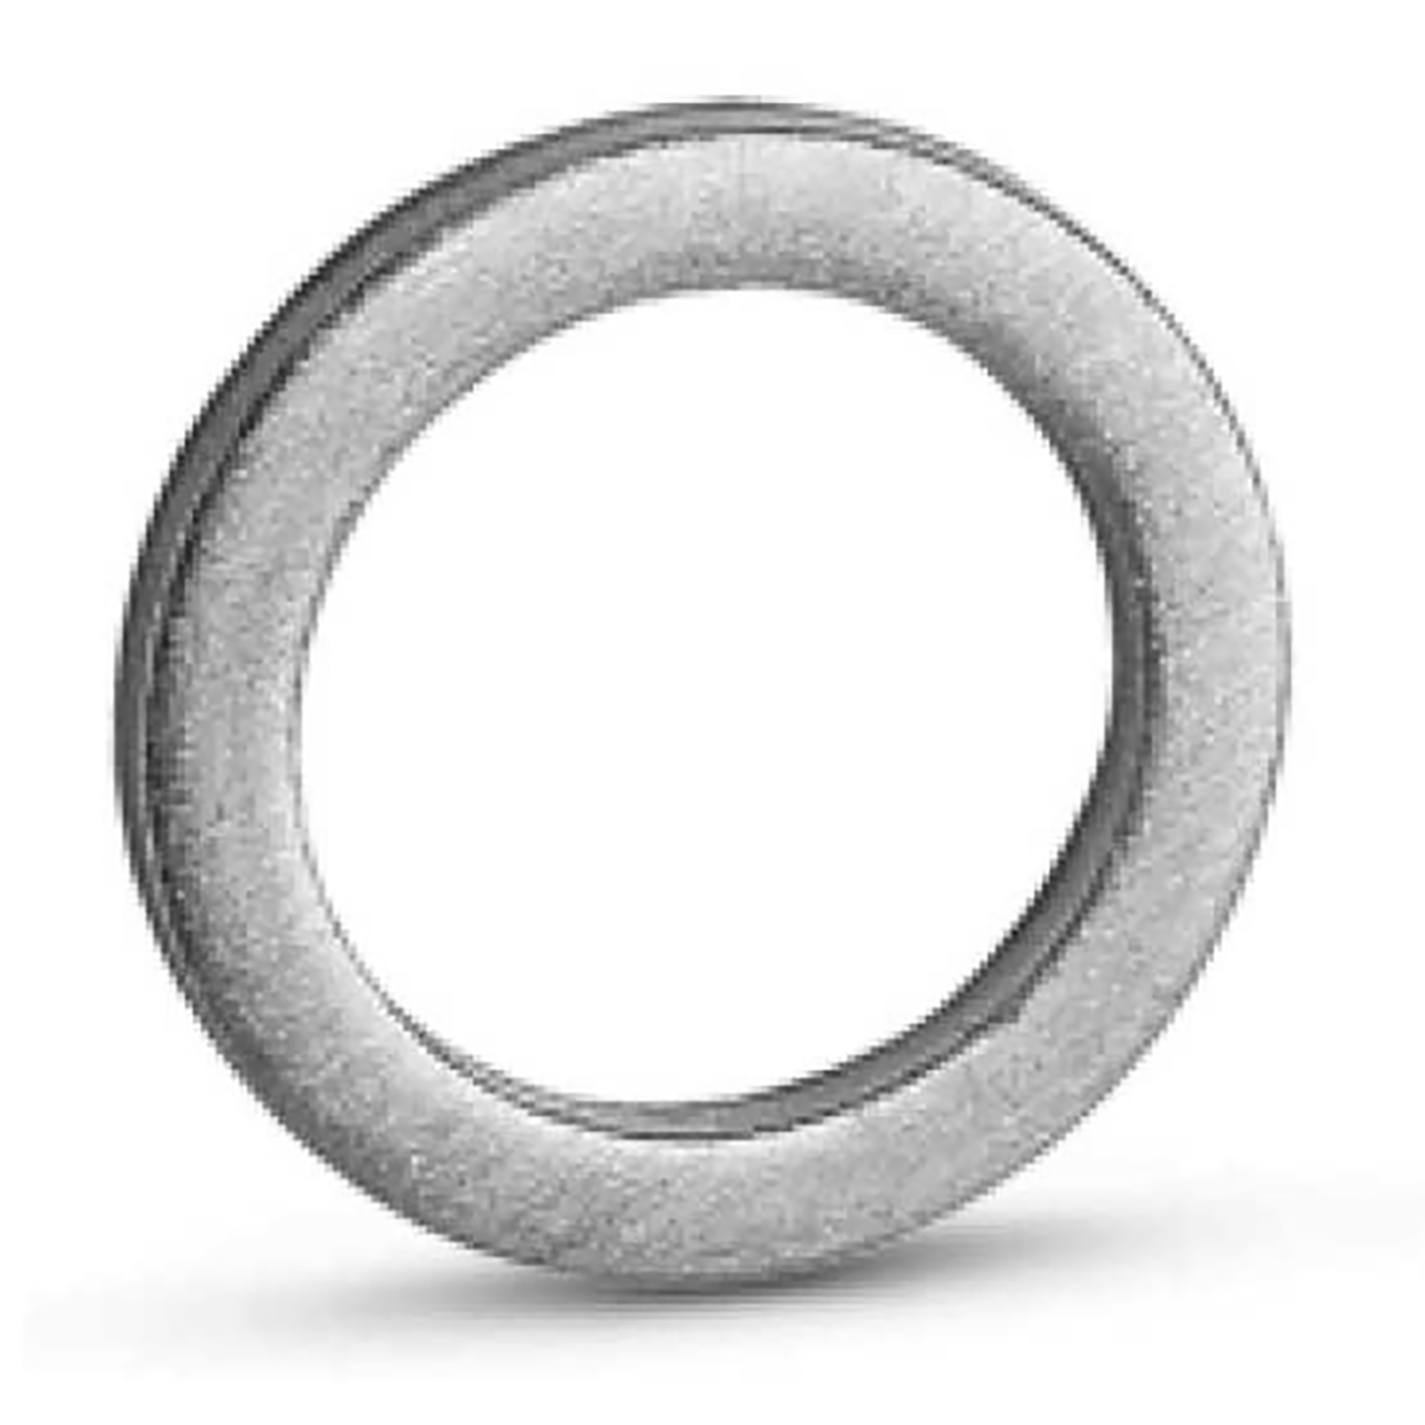 1" Series 1000 Super-Rapid Push-in Fitting Washer